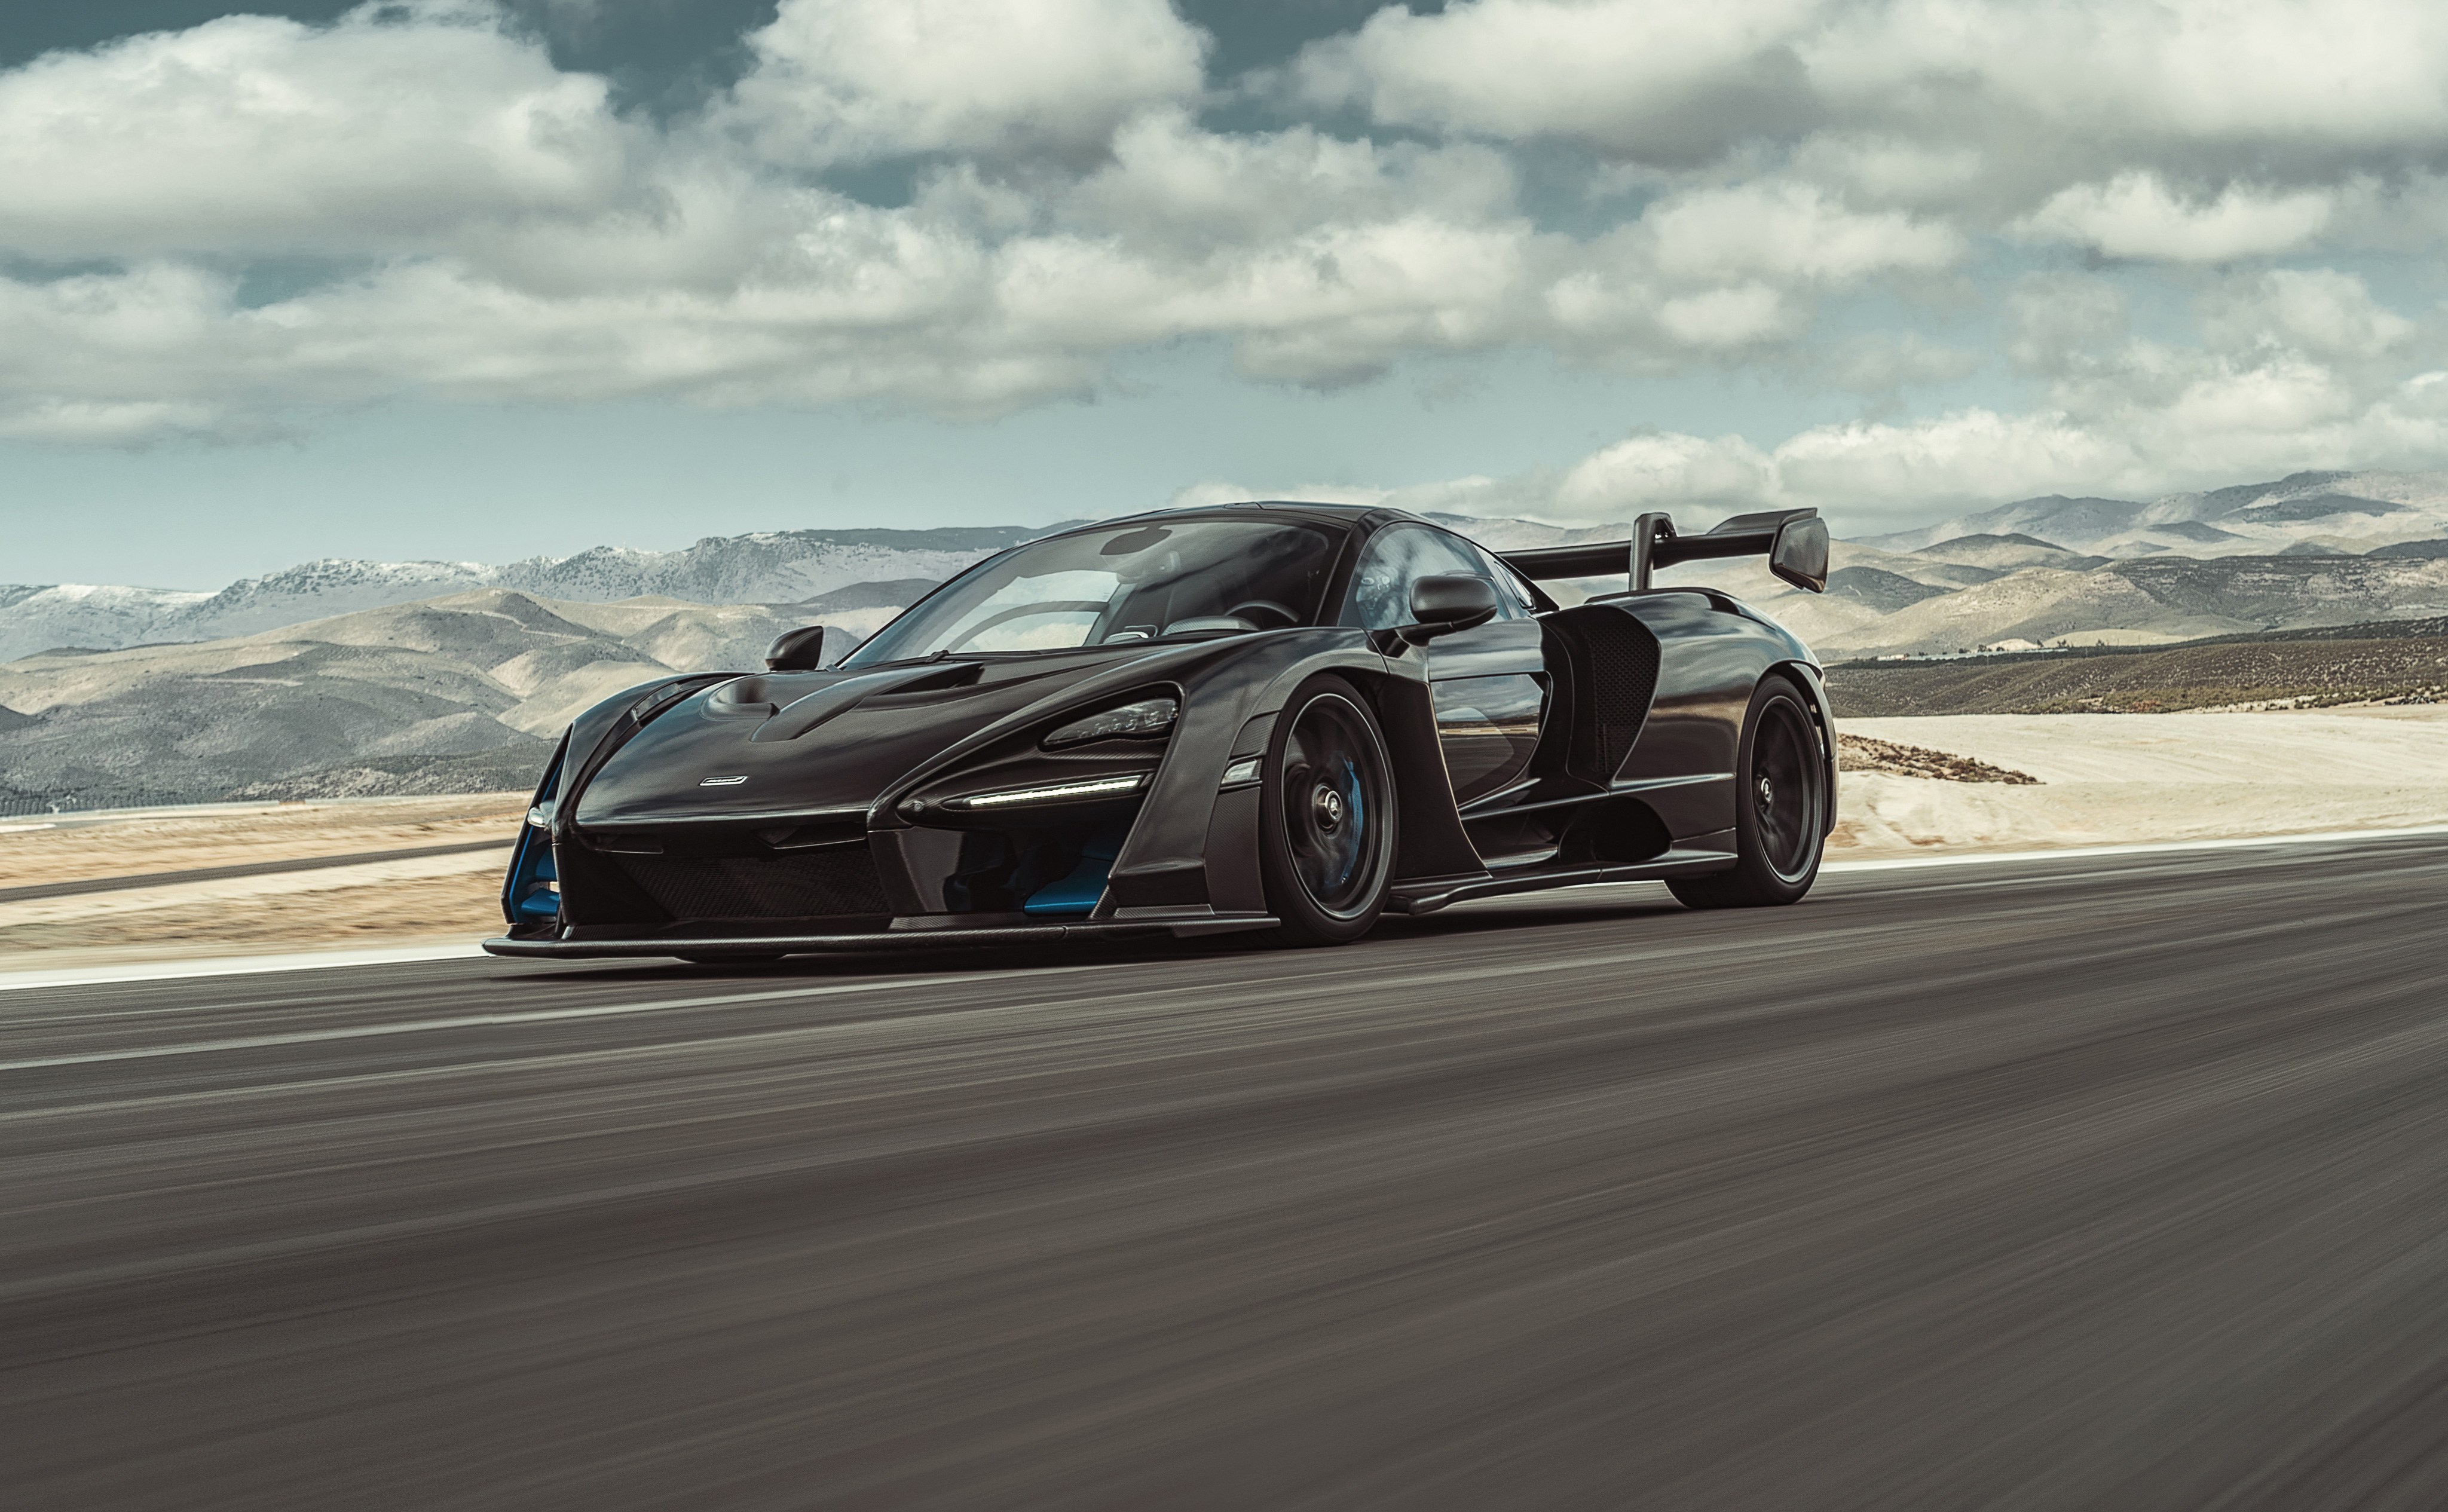 Mclaren Senna 4k Hd Cars 4k Wallpapers Images Backgrounds Photos And Pictures